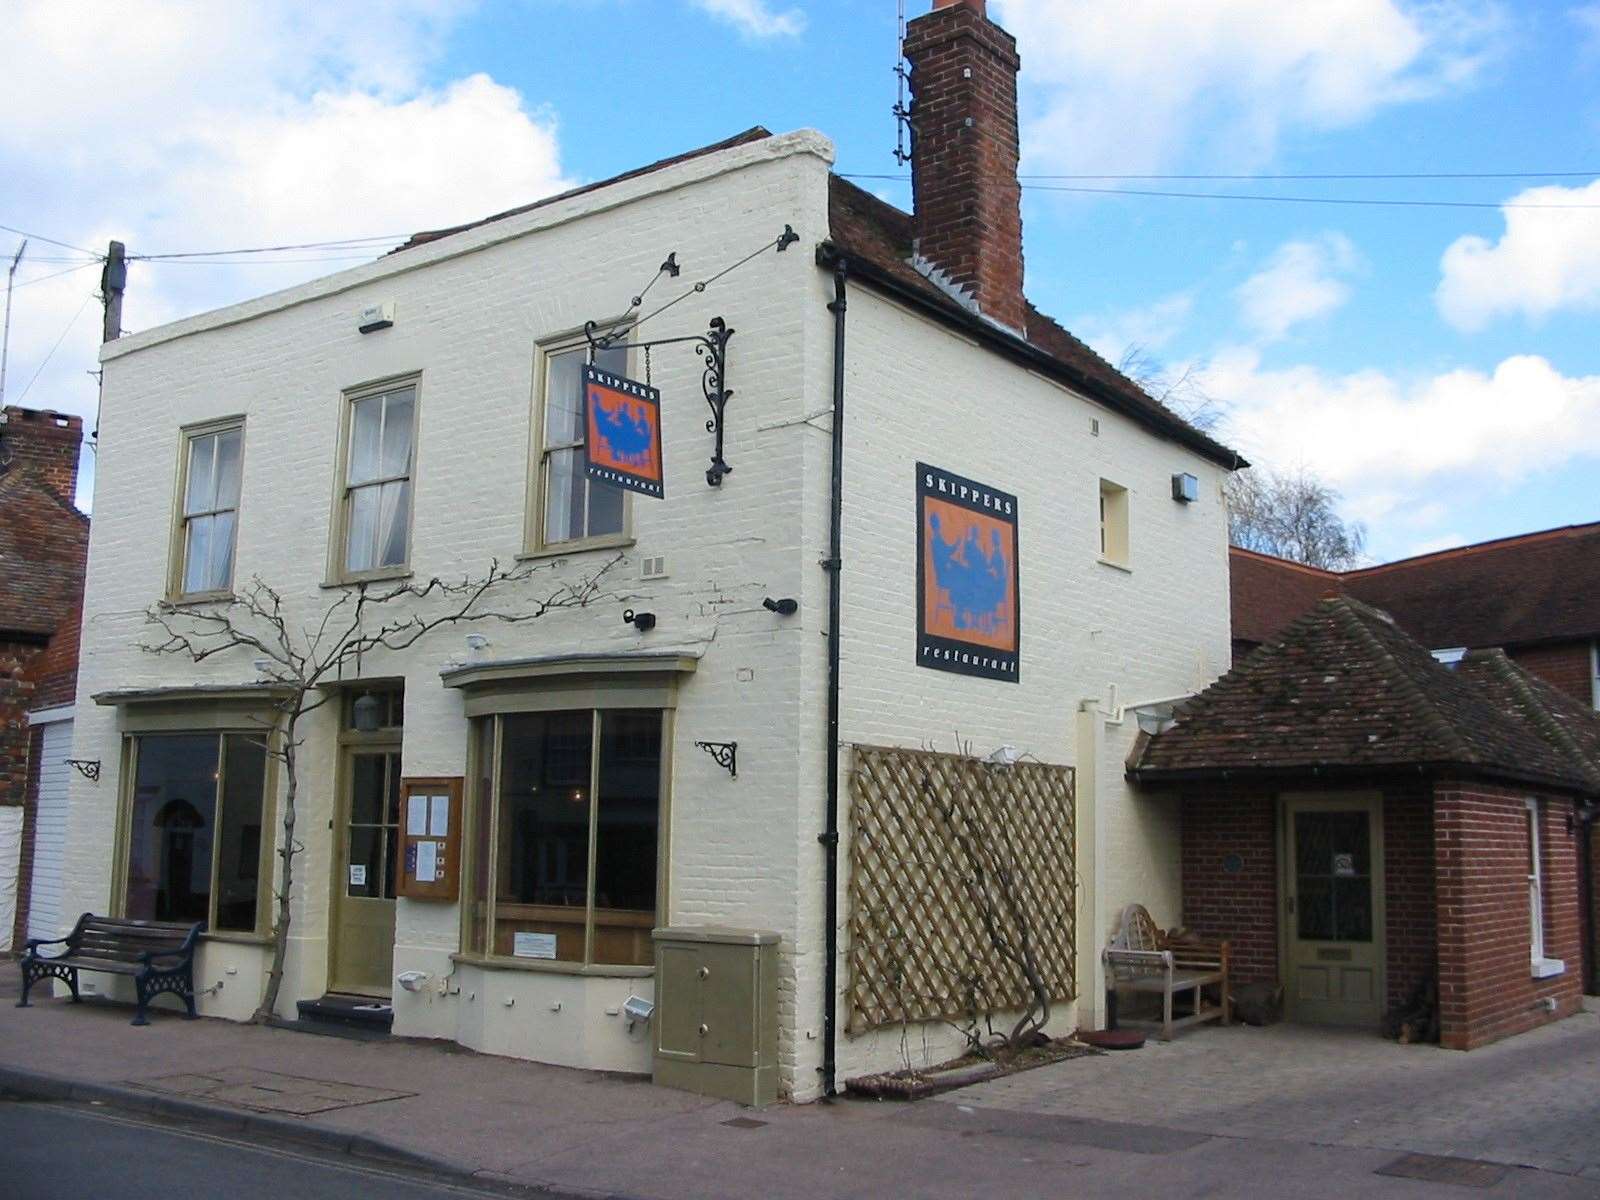 The Skippers restaurant pictured back in 2008